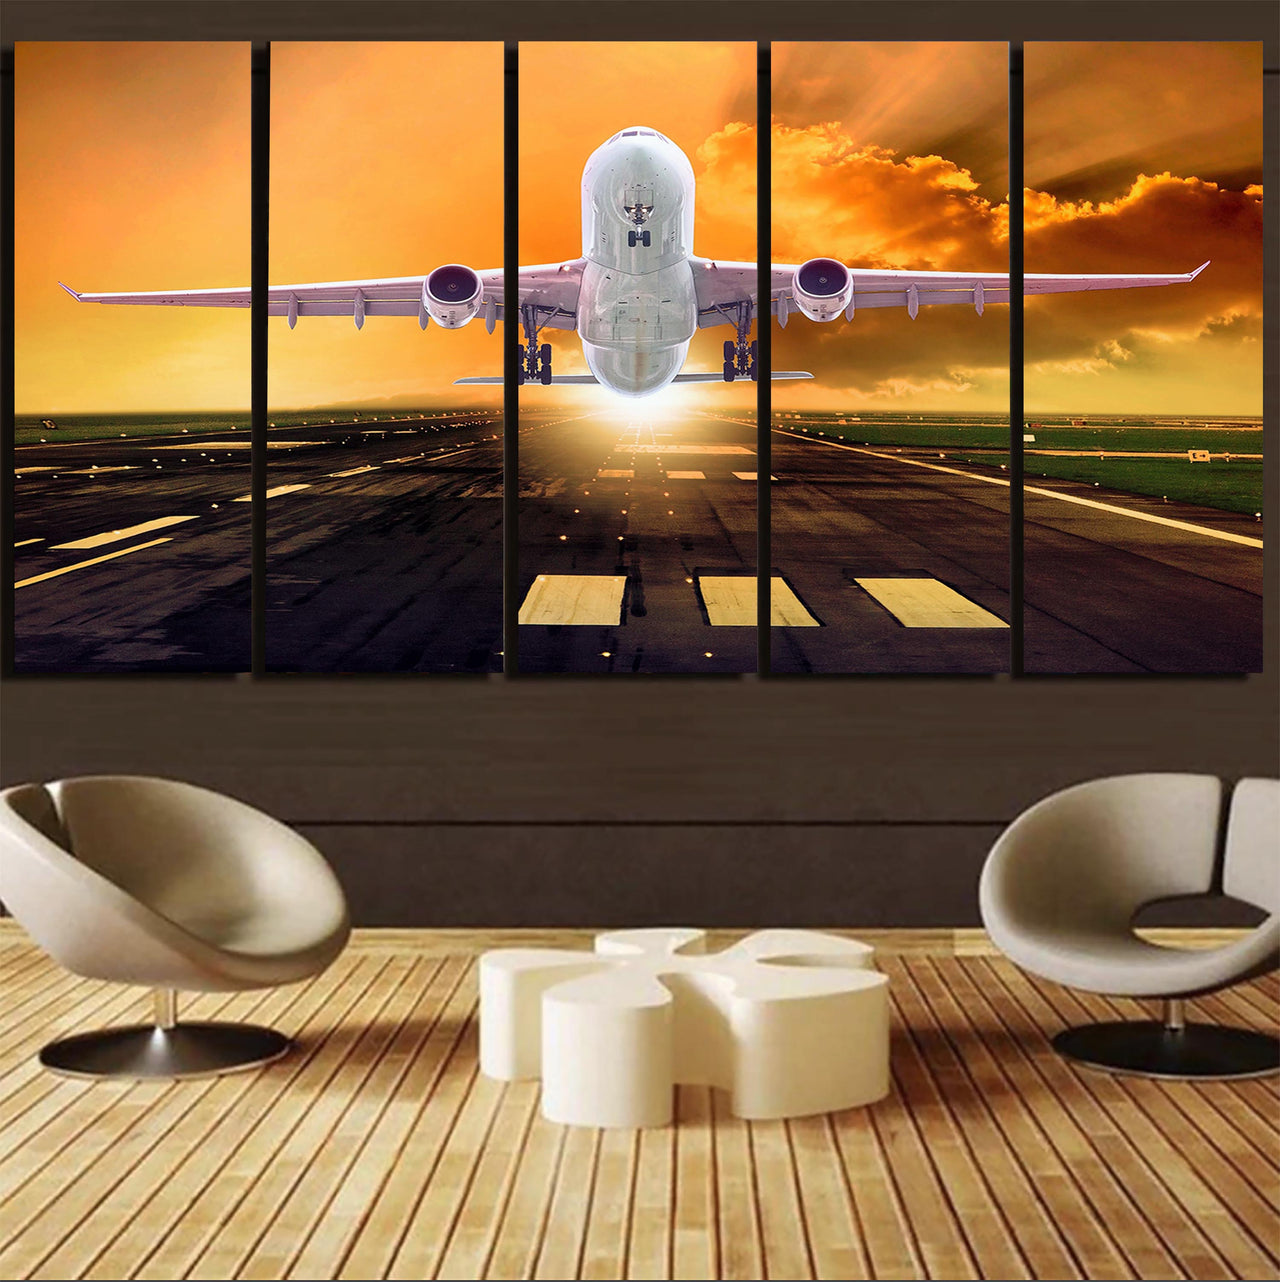 Amazing Departing Aircraft Sunset & Clouds Behind Printed Canvas Prints (5 Pieces)